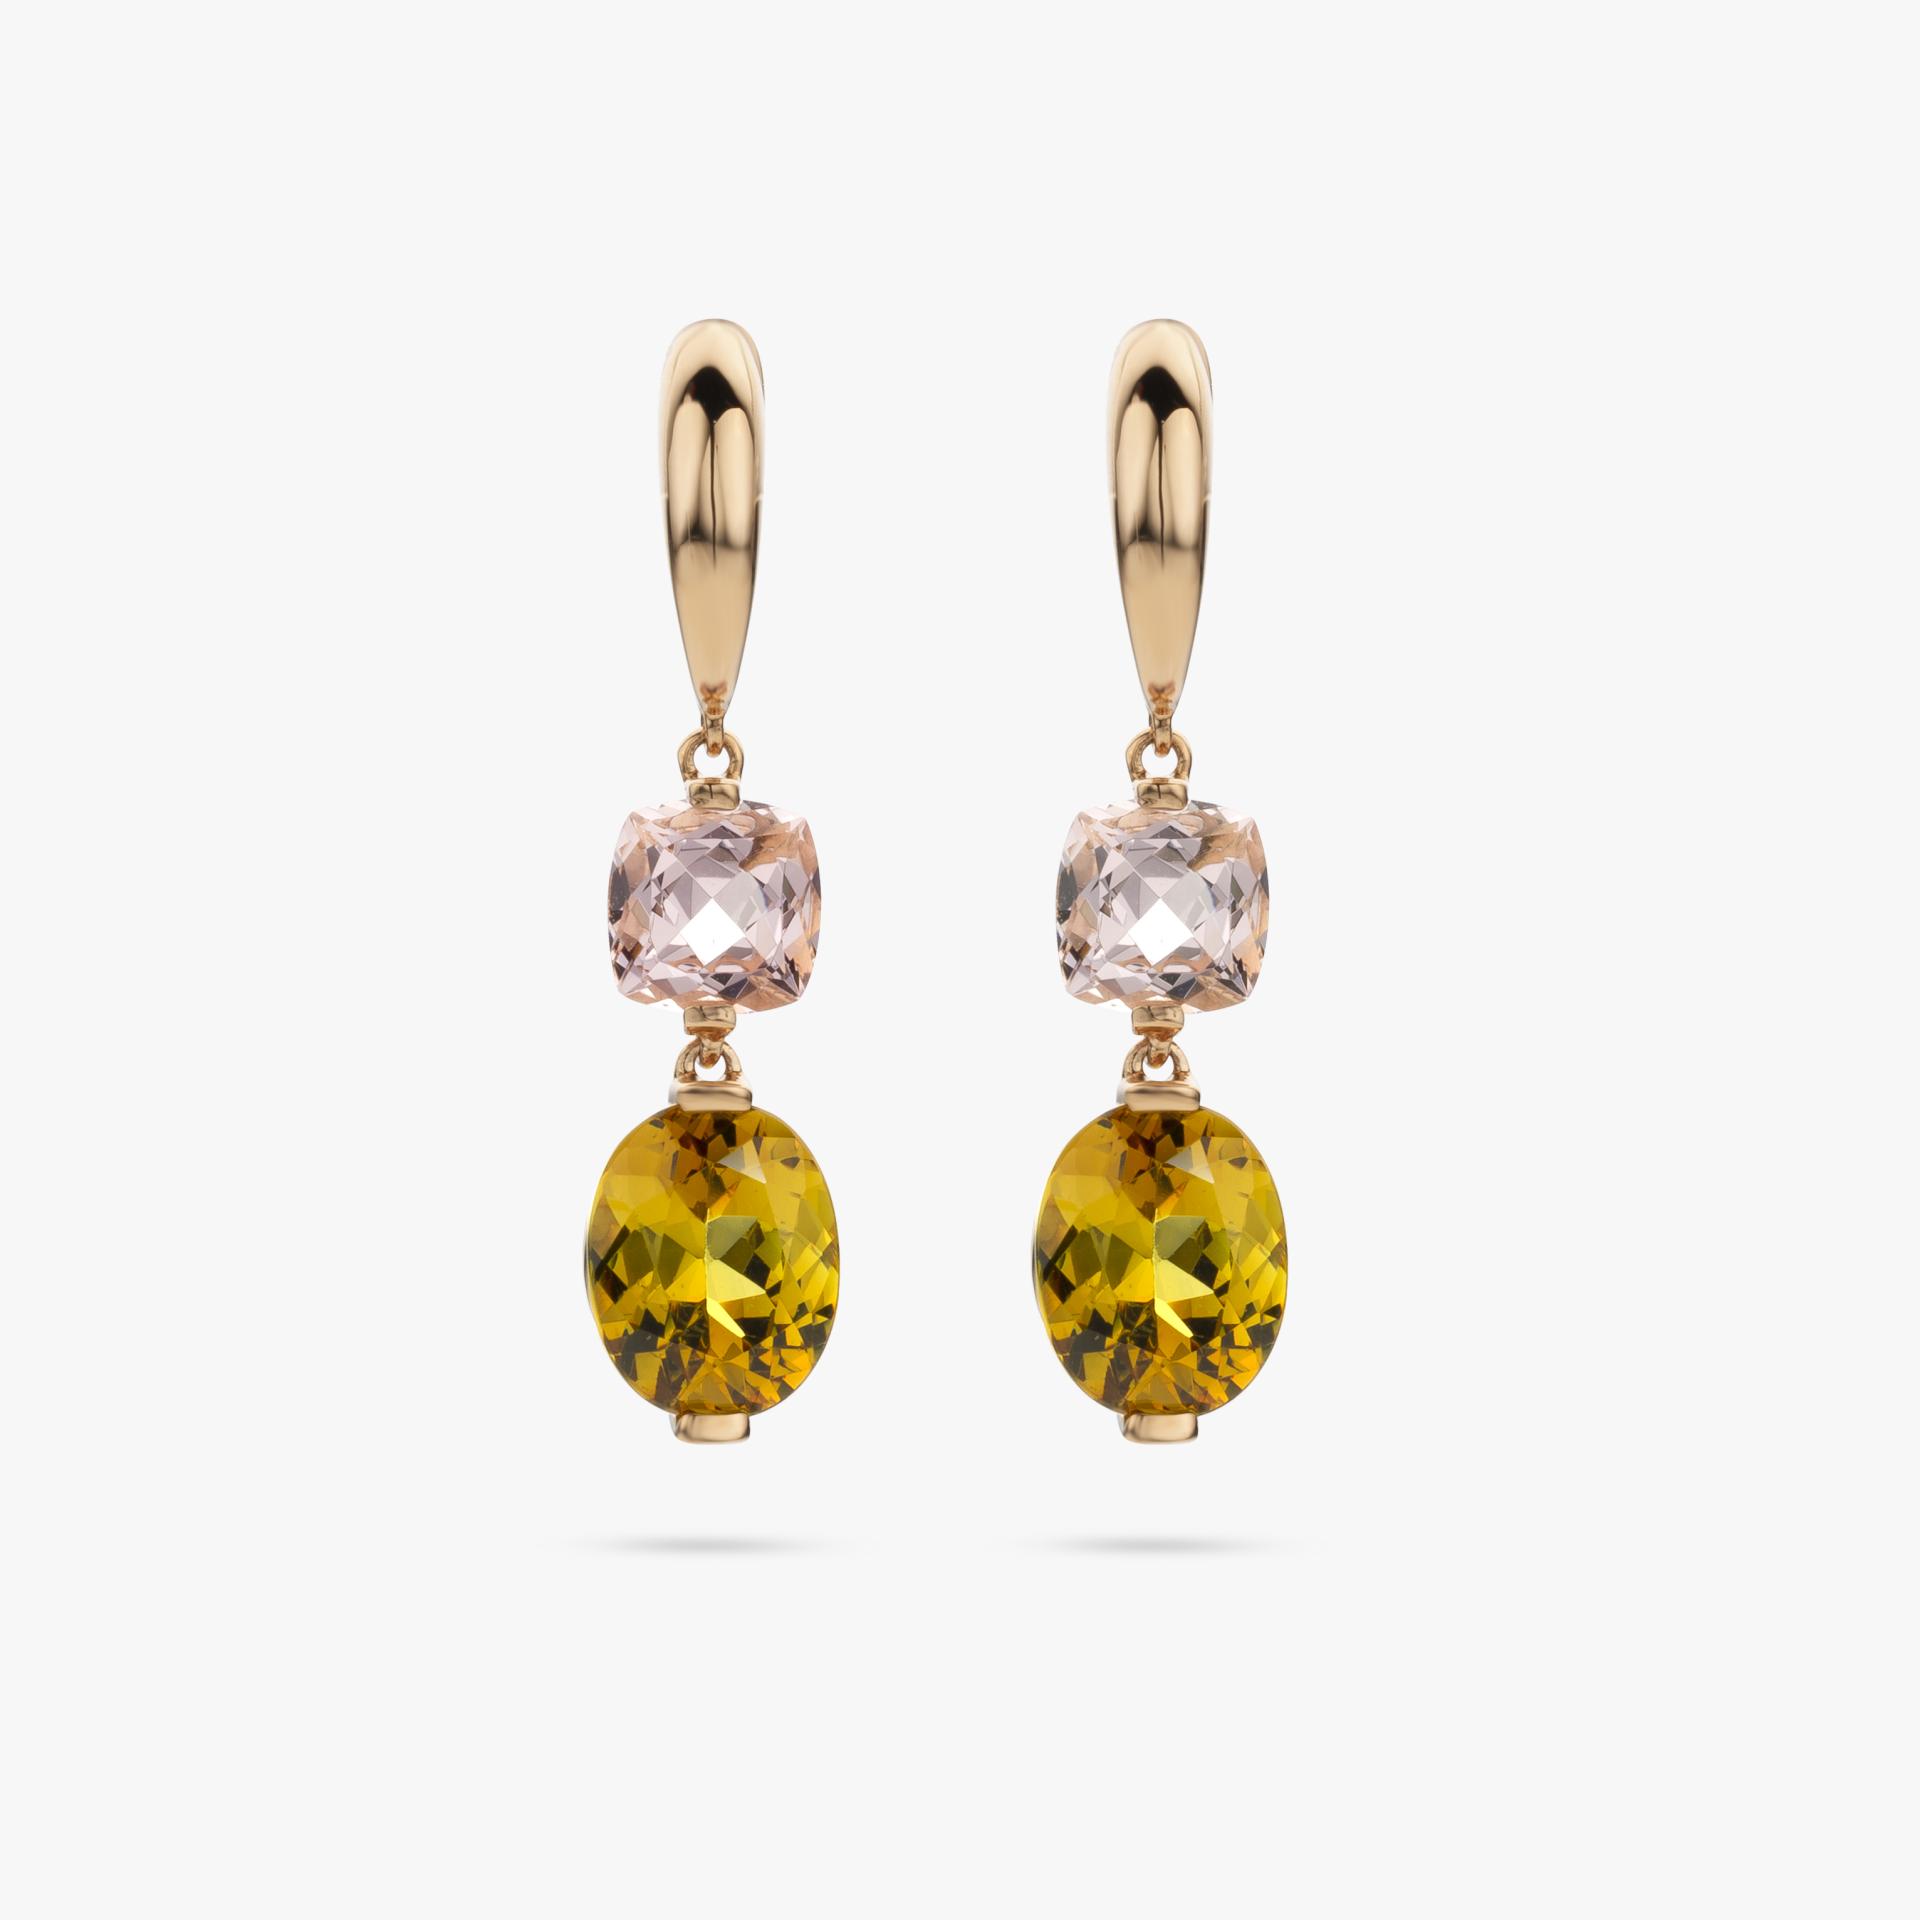 Rose gold earrings set with pink morganite and green garnet made by Maison De Greef